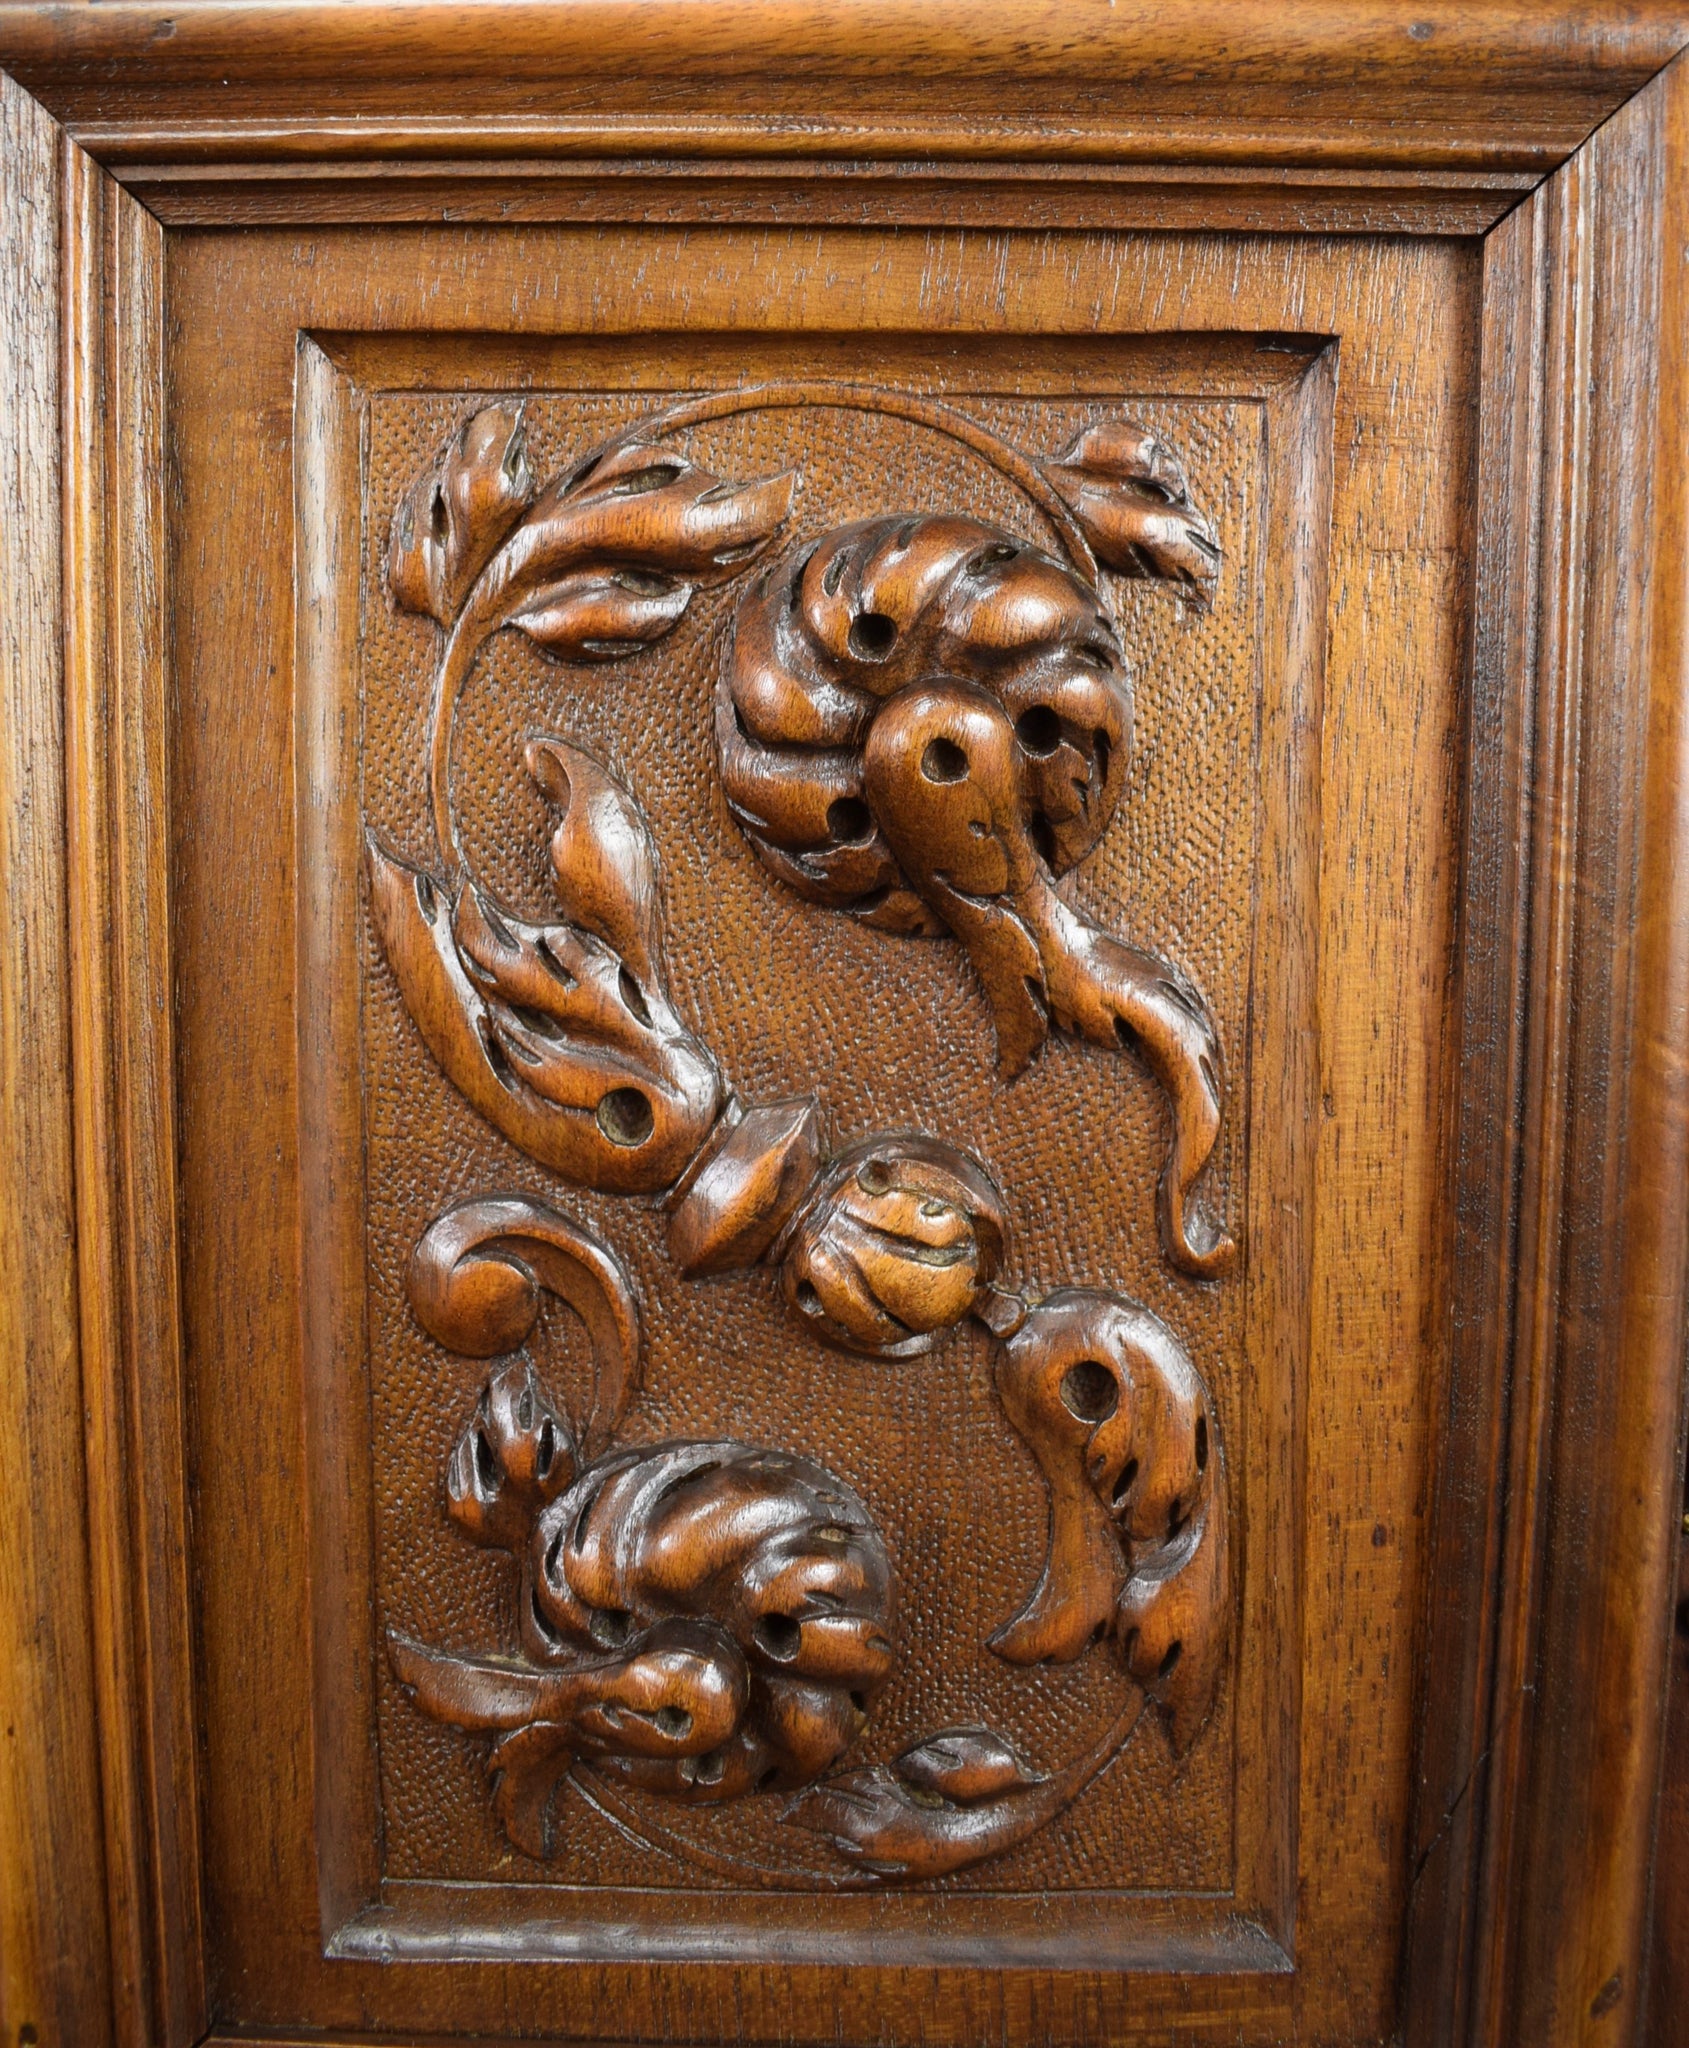 Hand Carved Wood Doors - Charmantiques